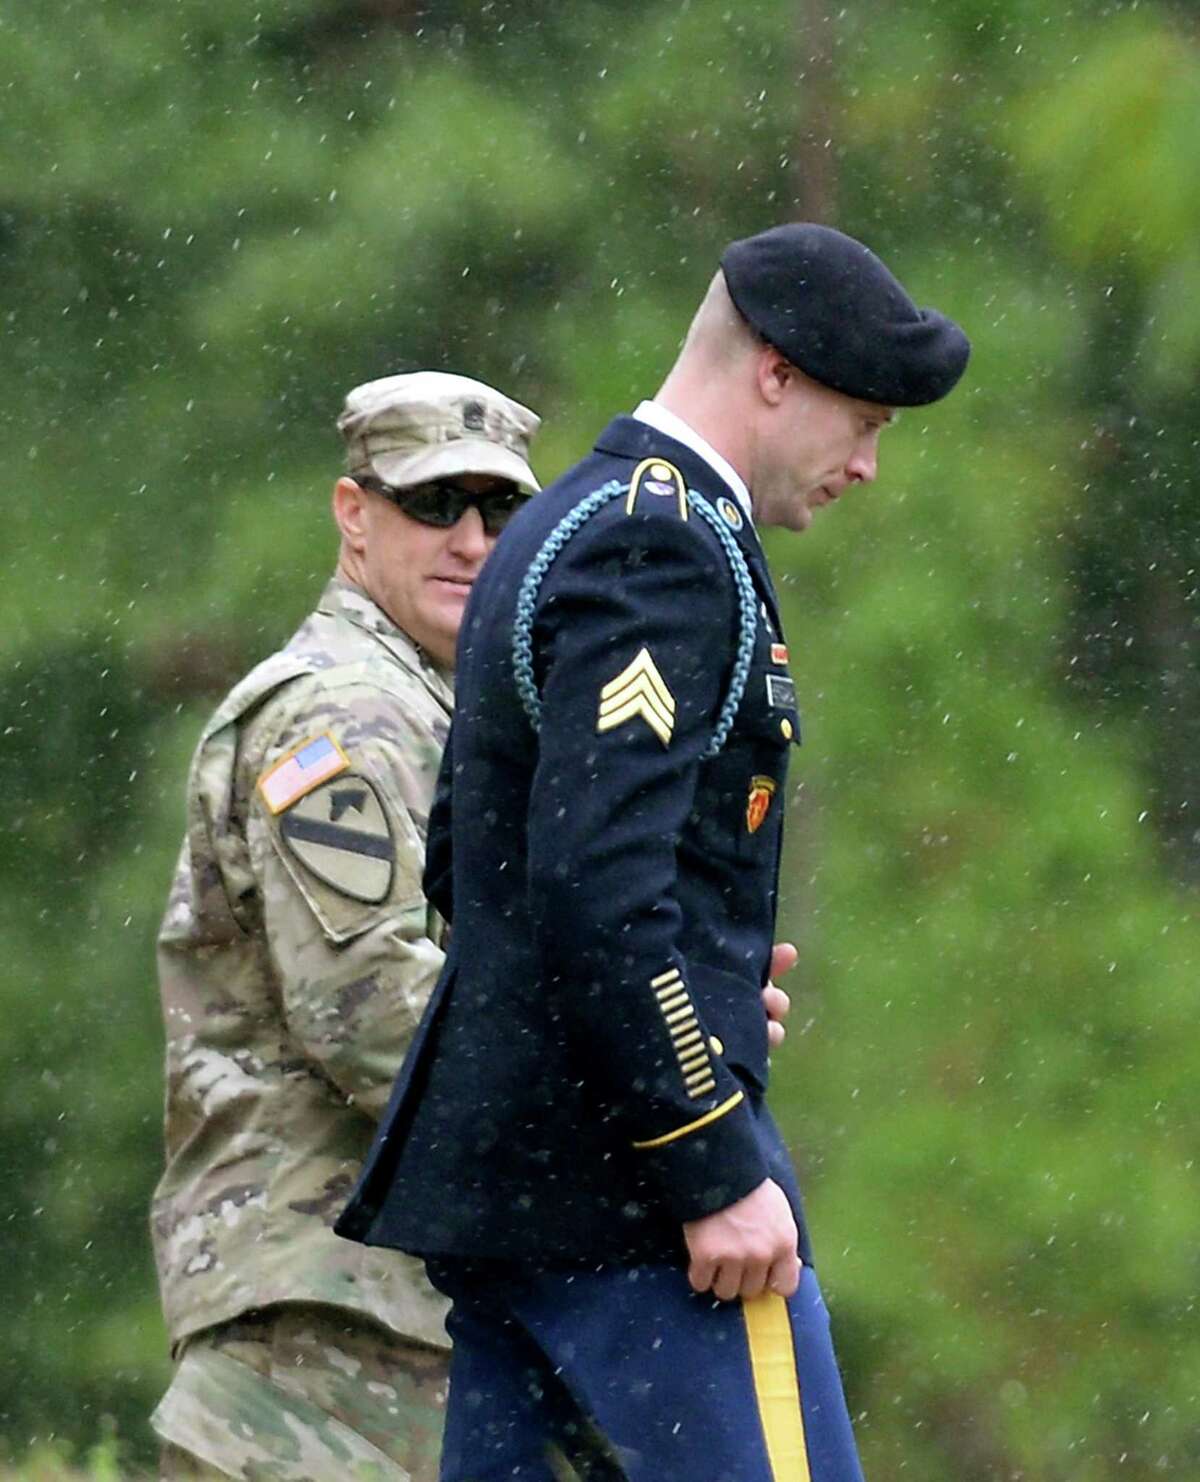 Army Sgt. Bowe Bergdahl leaves the courthouse at Fort Bragg, N.C., where he pleaded guilty to desertion and misbehavior before the enemy.